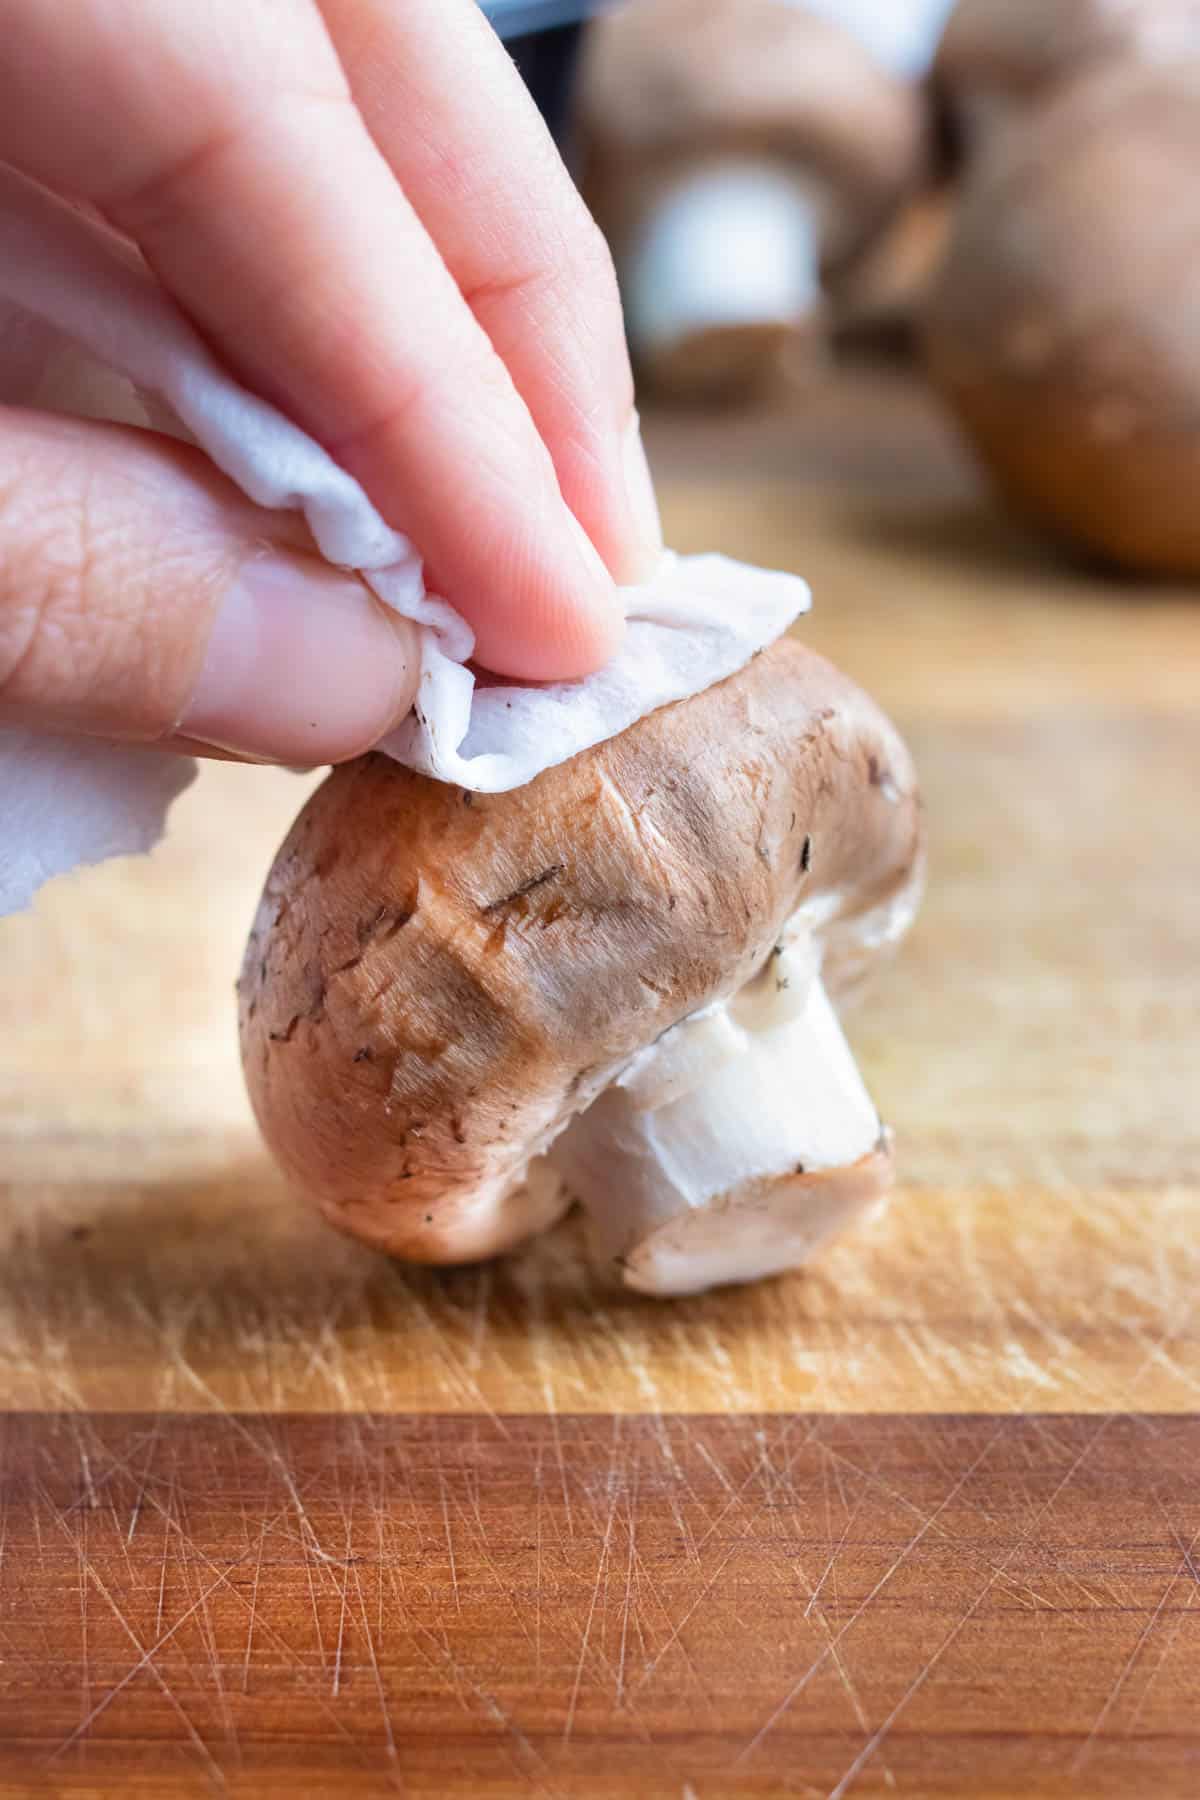 Mushrooms are cleaned with a damp paper towel.